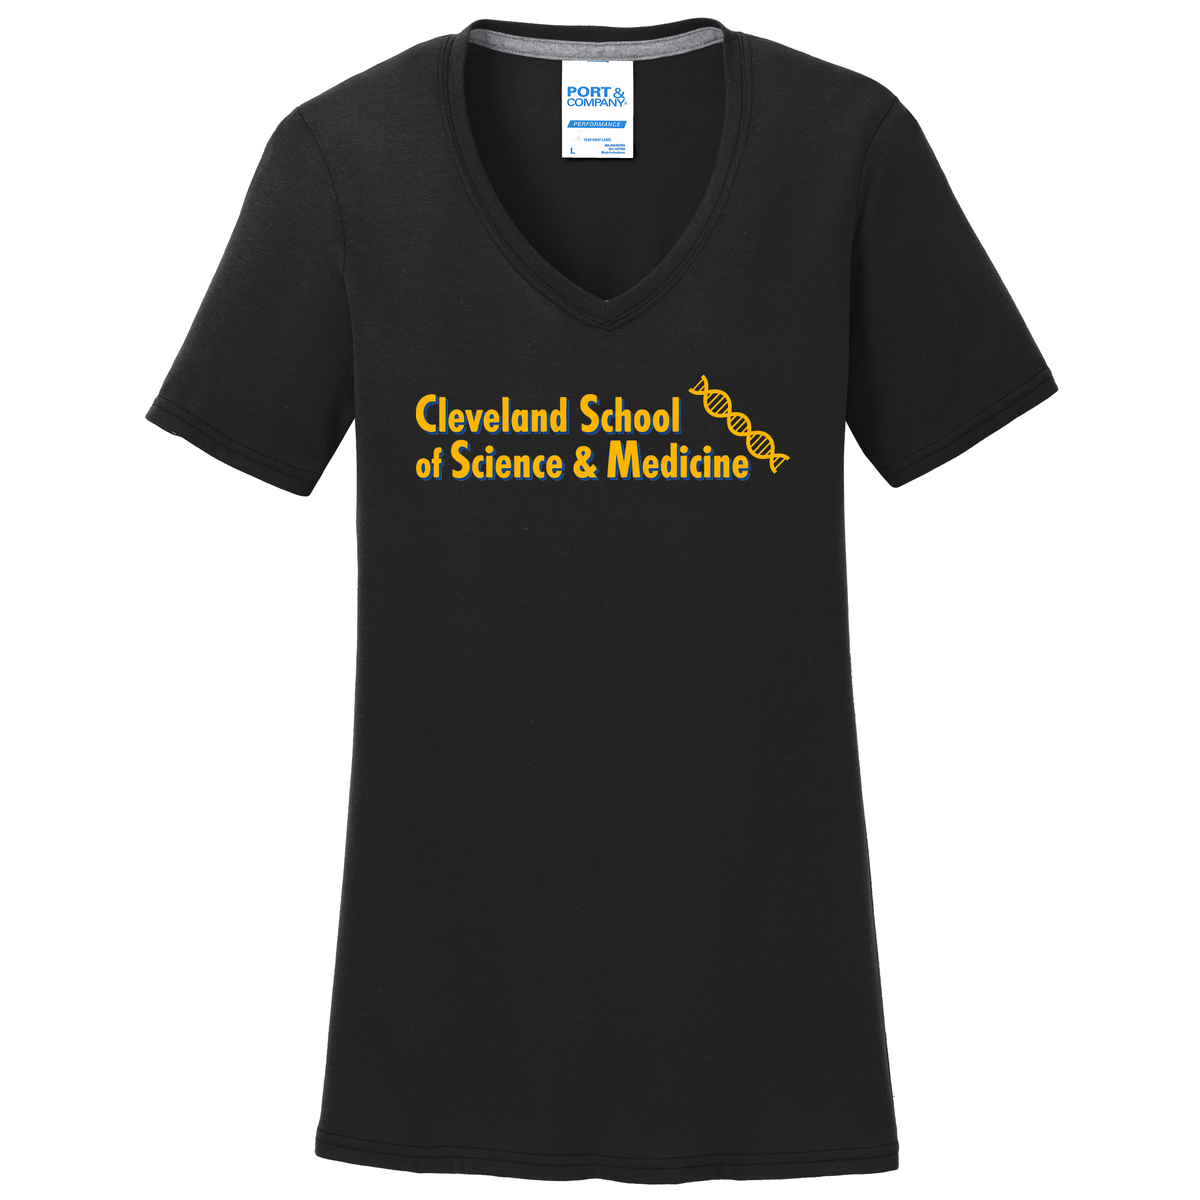 Cleveland School of Science and Medicine Women's T-Shirt